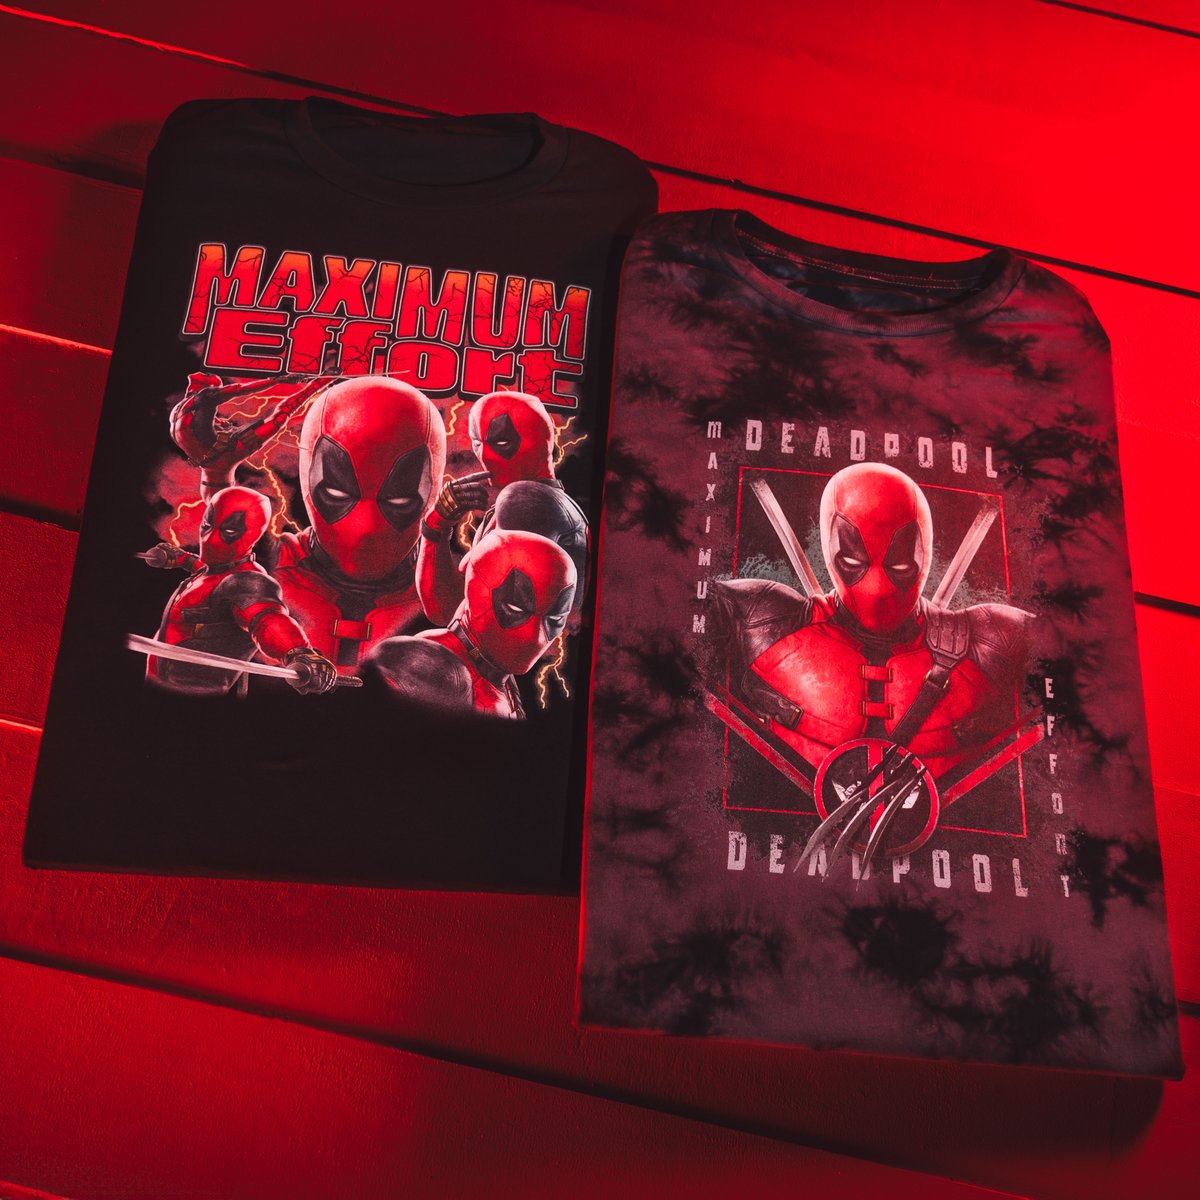 better put maximum effort into your next 'fit ‼ exclusive Deadpool tees now at Hot Topic.